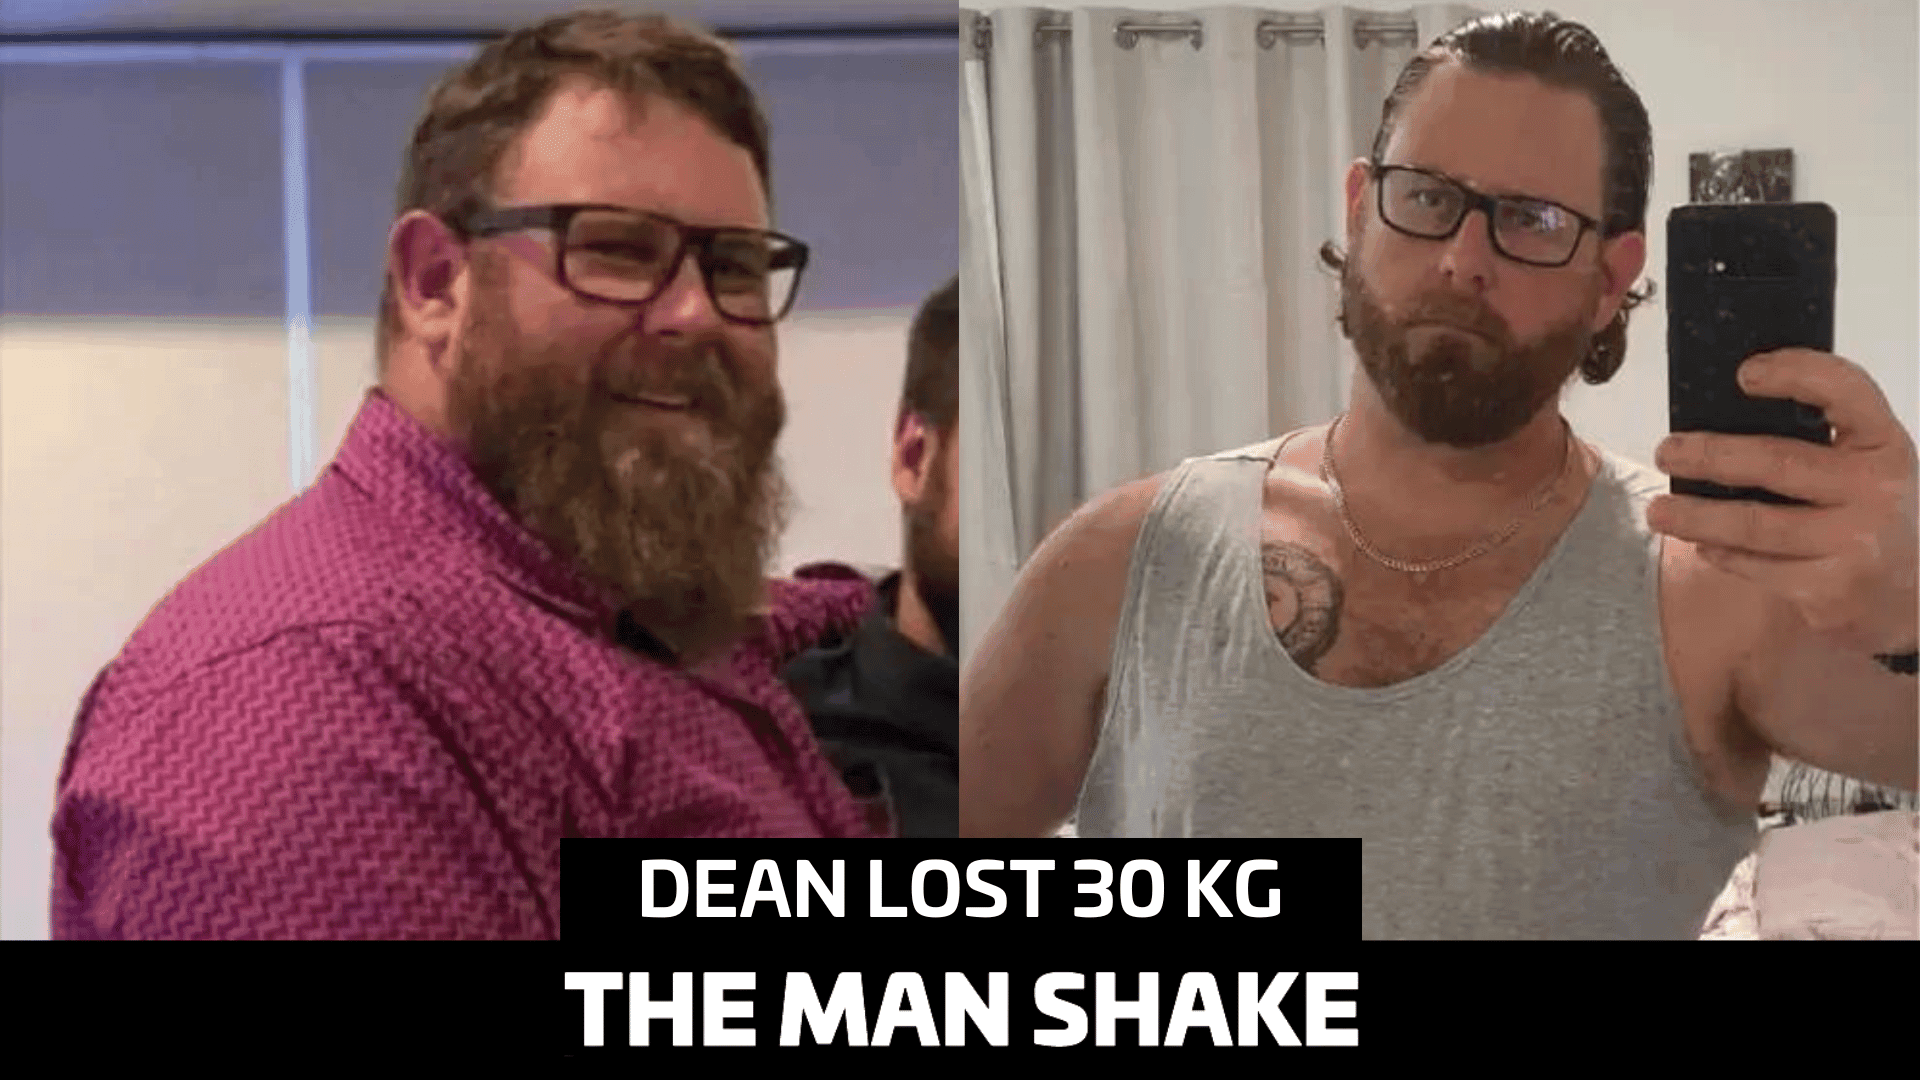 Dean overcame a workplace accident and lost 30kg!